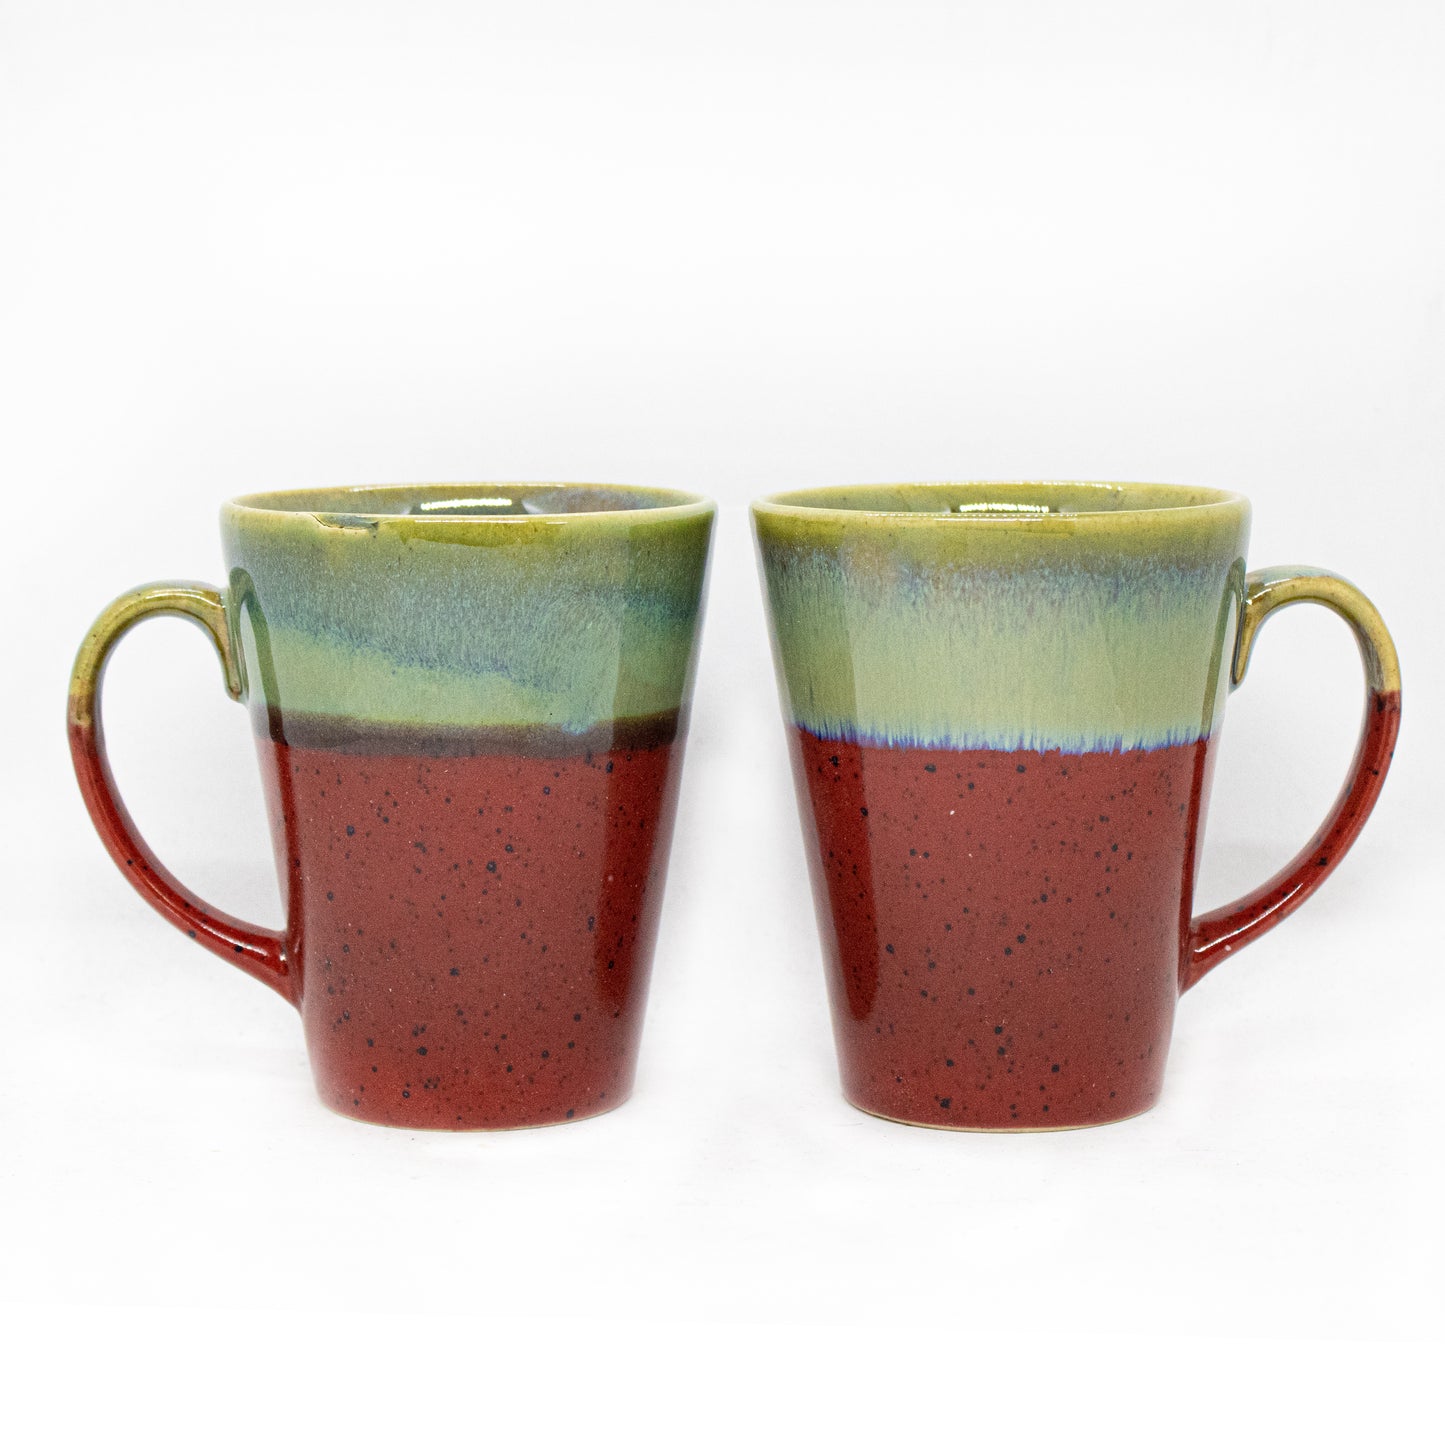 'When Life Gives You Melons, Have Some Watermelon'! Ceramic Coffee Mug (Set of Two)